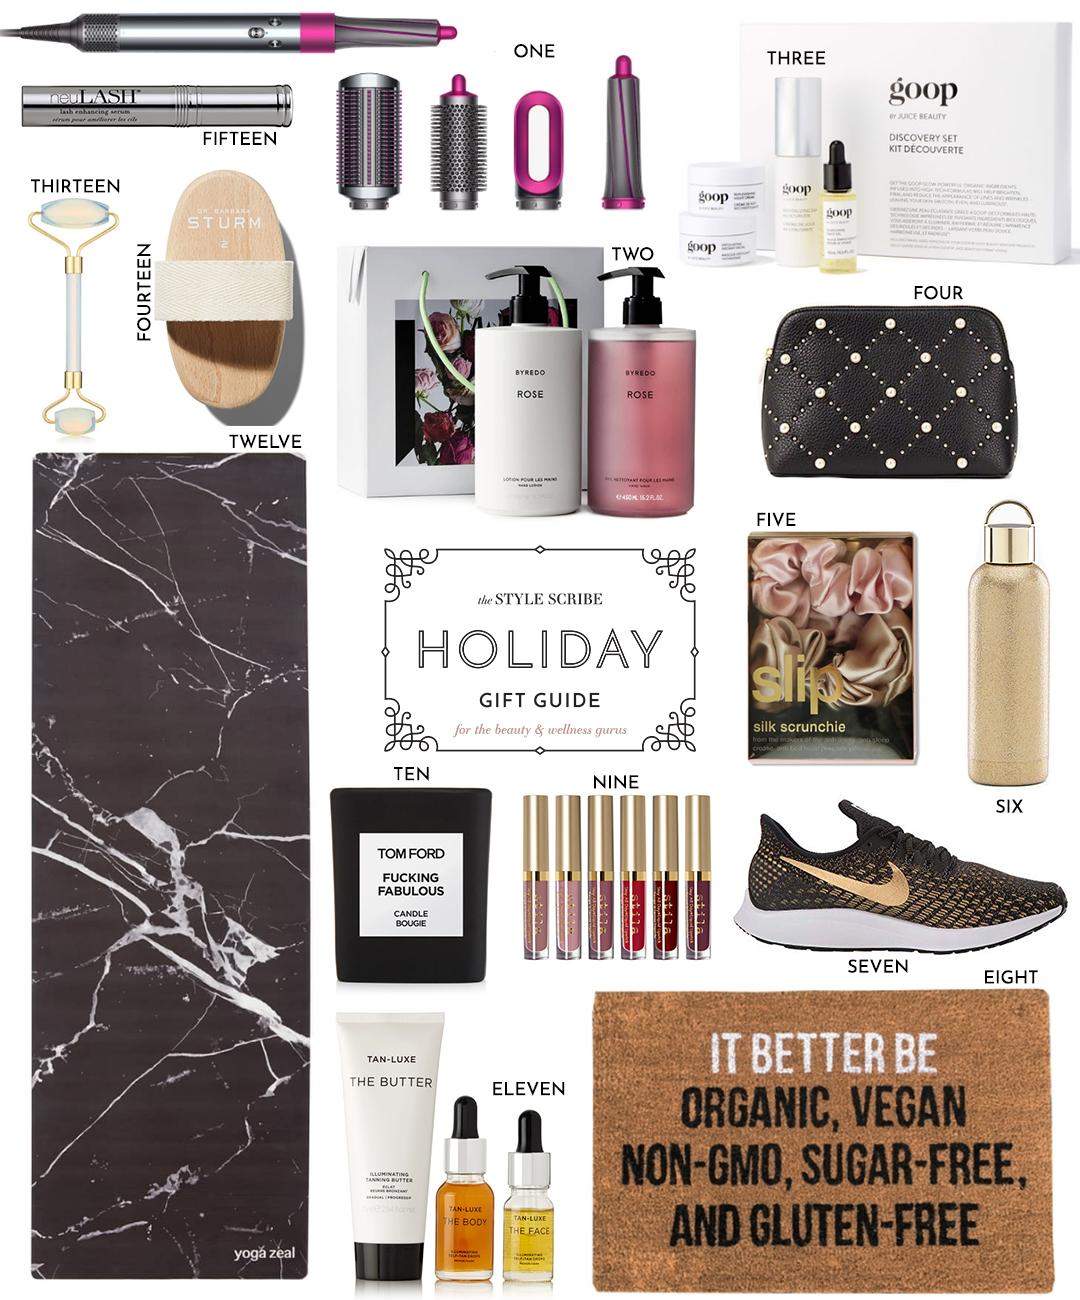 HOLIDAY GIFT GUIDE // FOR THE BEAUTY & WELLNESS GURUS